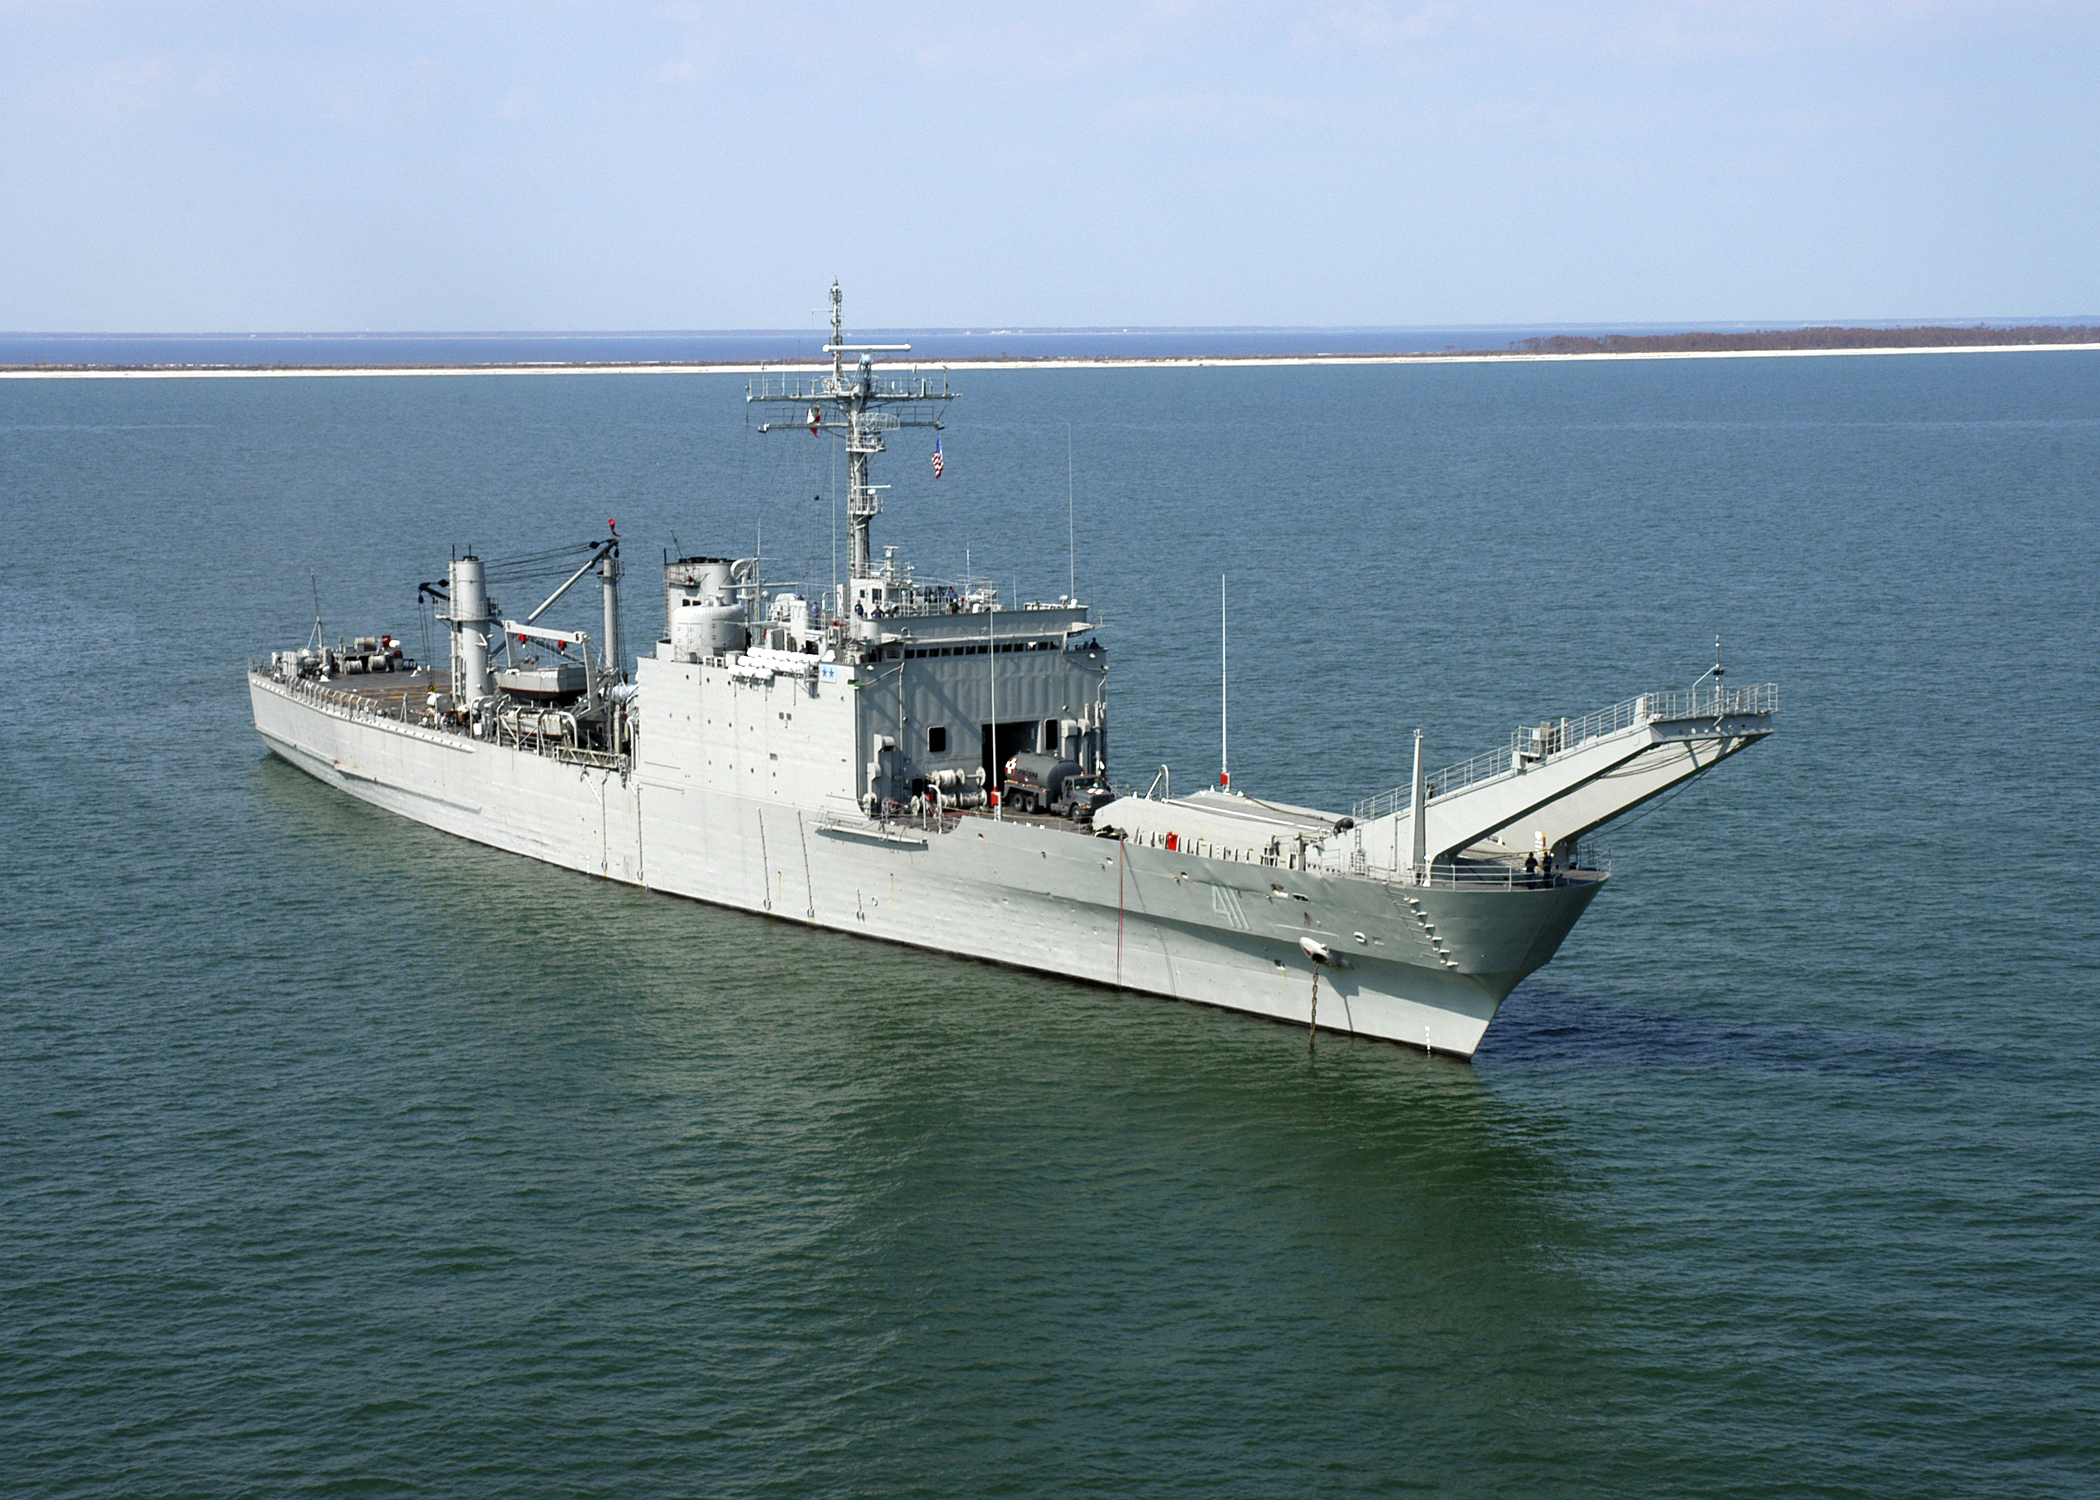 File:US Navy 050909-N-8154G-180 The Mexican ship Papaloapan (P-411) sits off coast of Mississippi preparing to assist with Hurricane Katrina relief efforts along the Gulf Coast.jpg - Wikimedia Commons